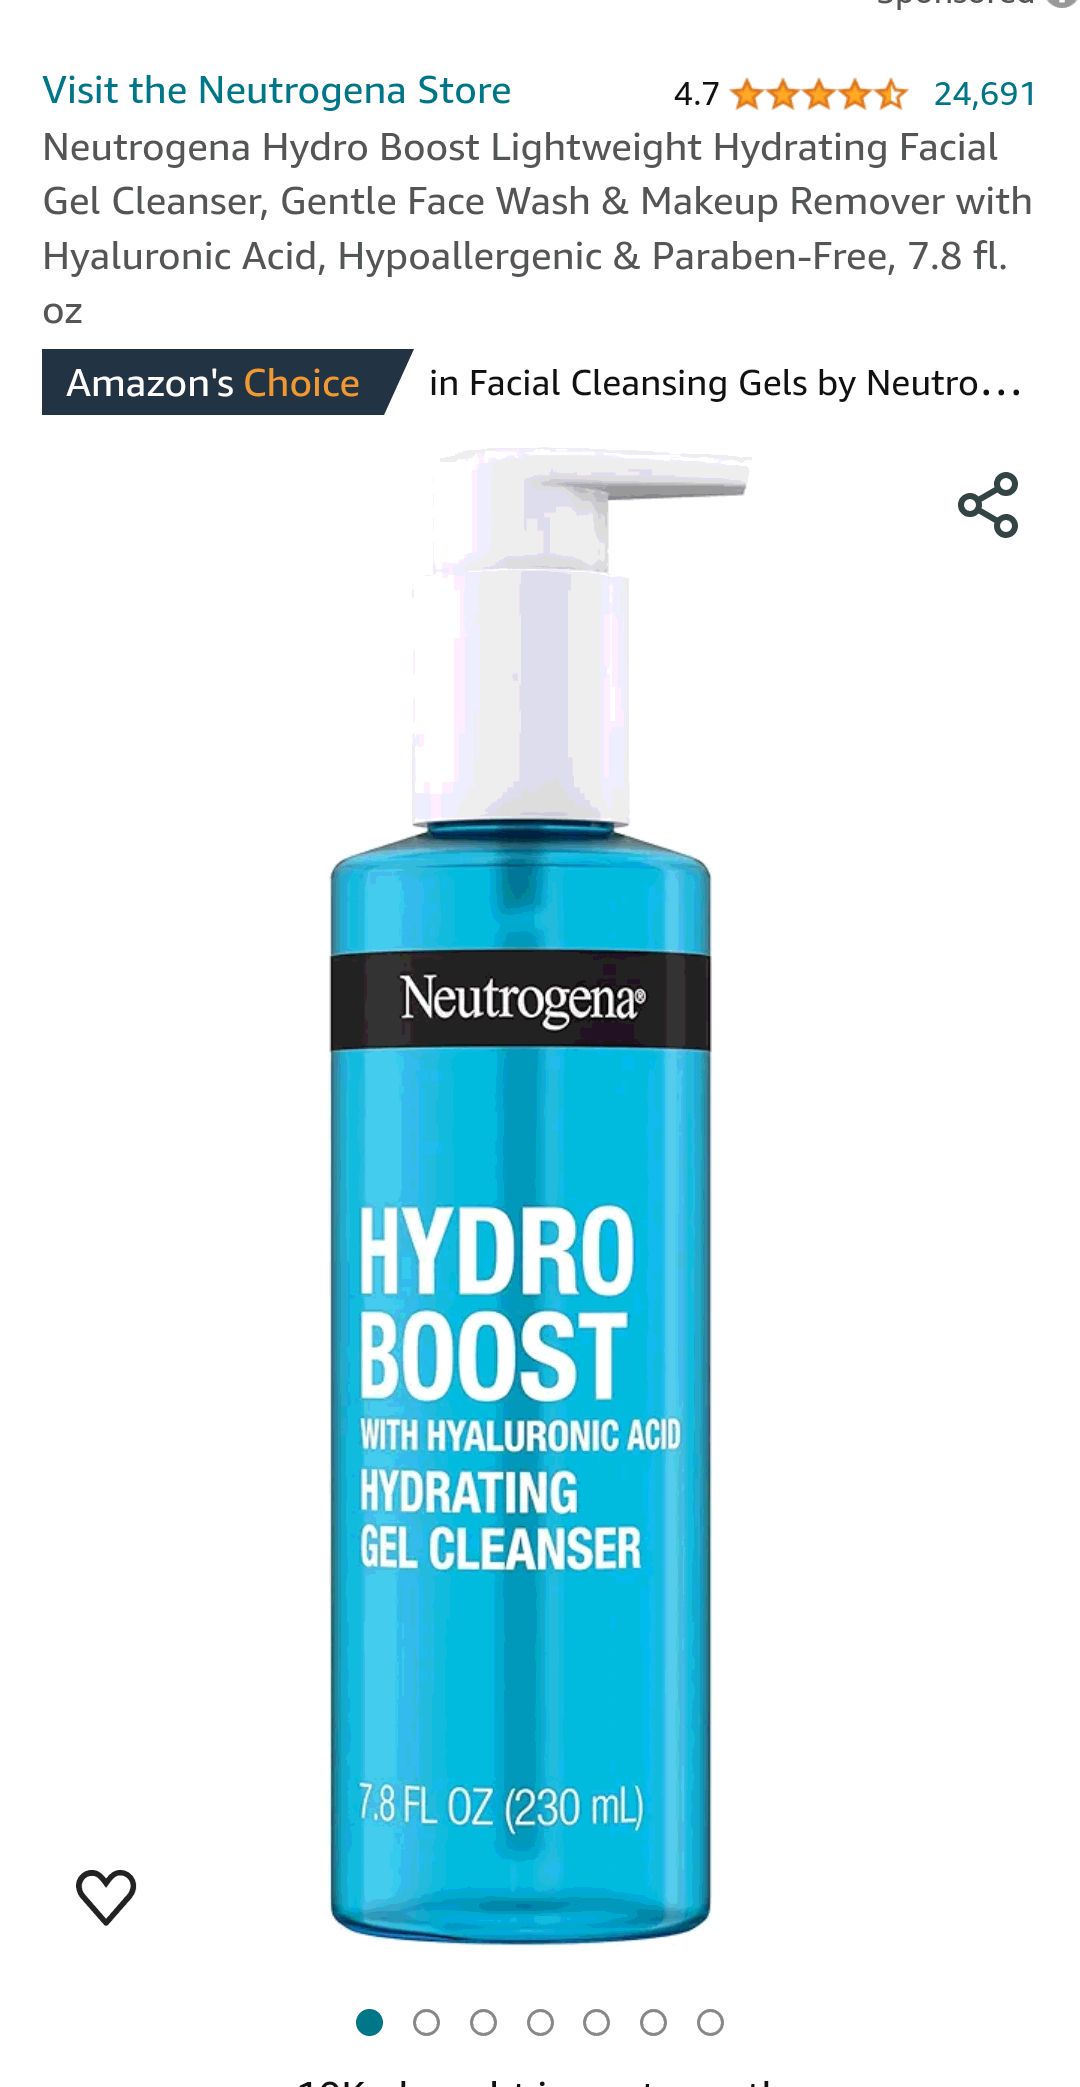 Neutrogena Hydro Boost Lightweight Hydrating Facial Gel Cleanser, Gentle Face Wash & Makeup Remover with Hyaluronic Acid, Hypoallergenic & Paraben-Free, 7.8 fl. oz : Beauty & Personal Care